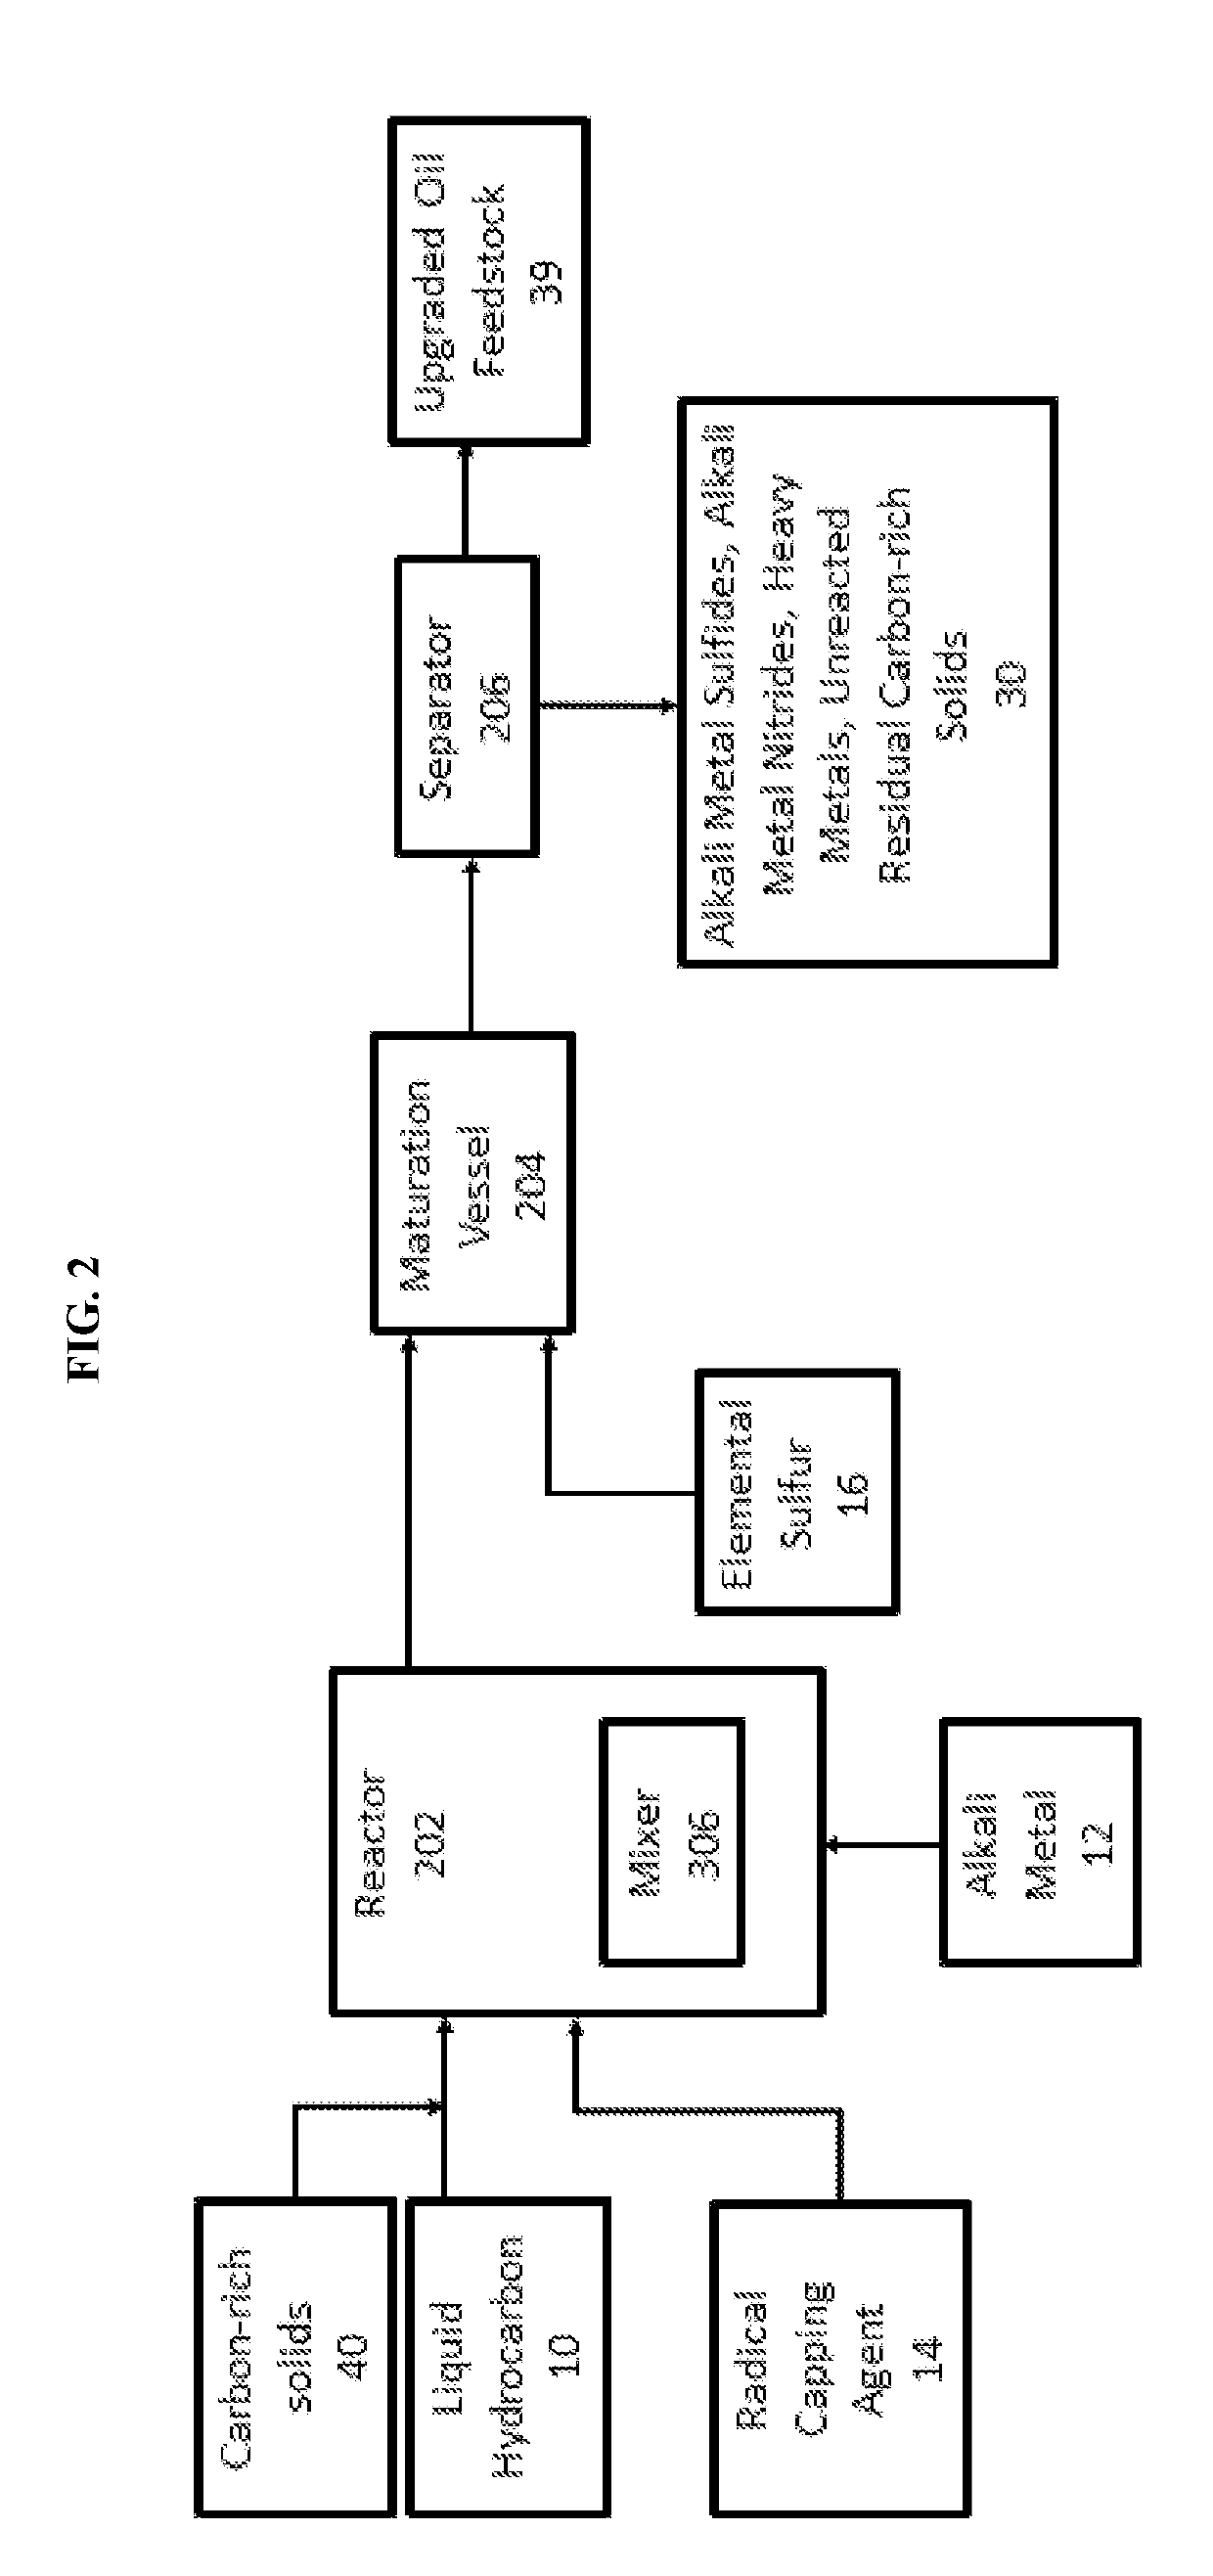 Process for separating particles containing alkali metal salts from liquid hydrocarbons